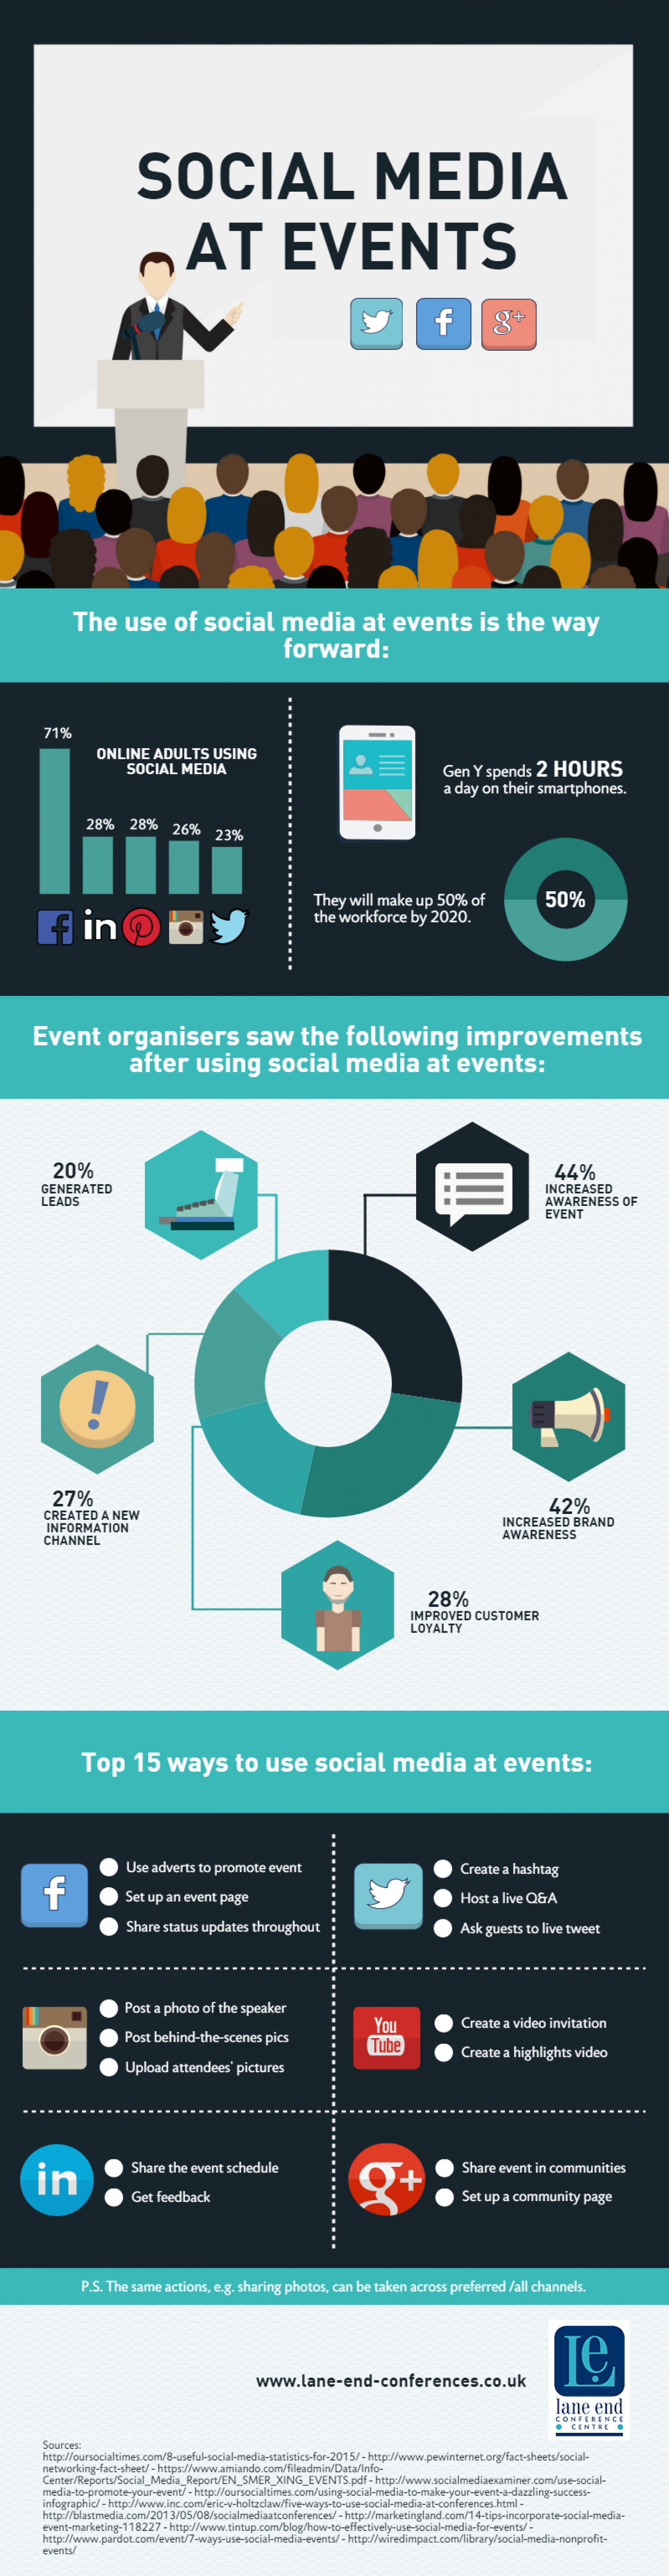 Social Media at Events Infographic